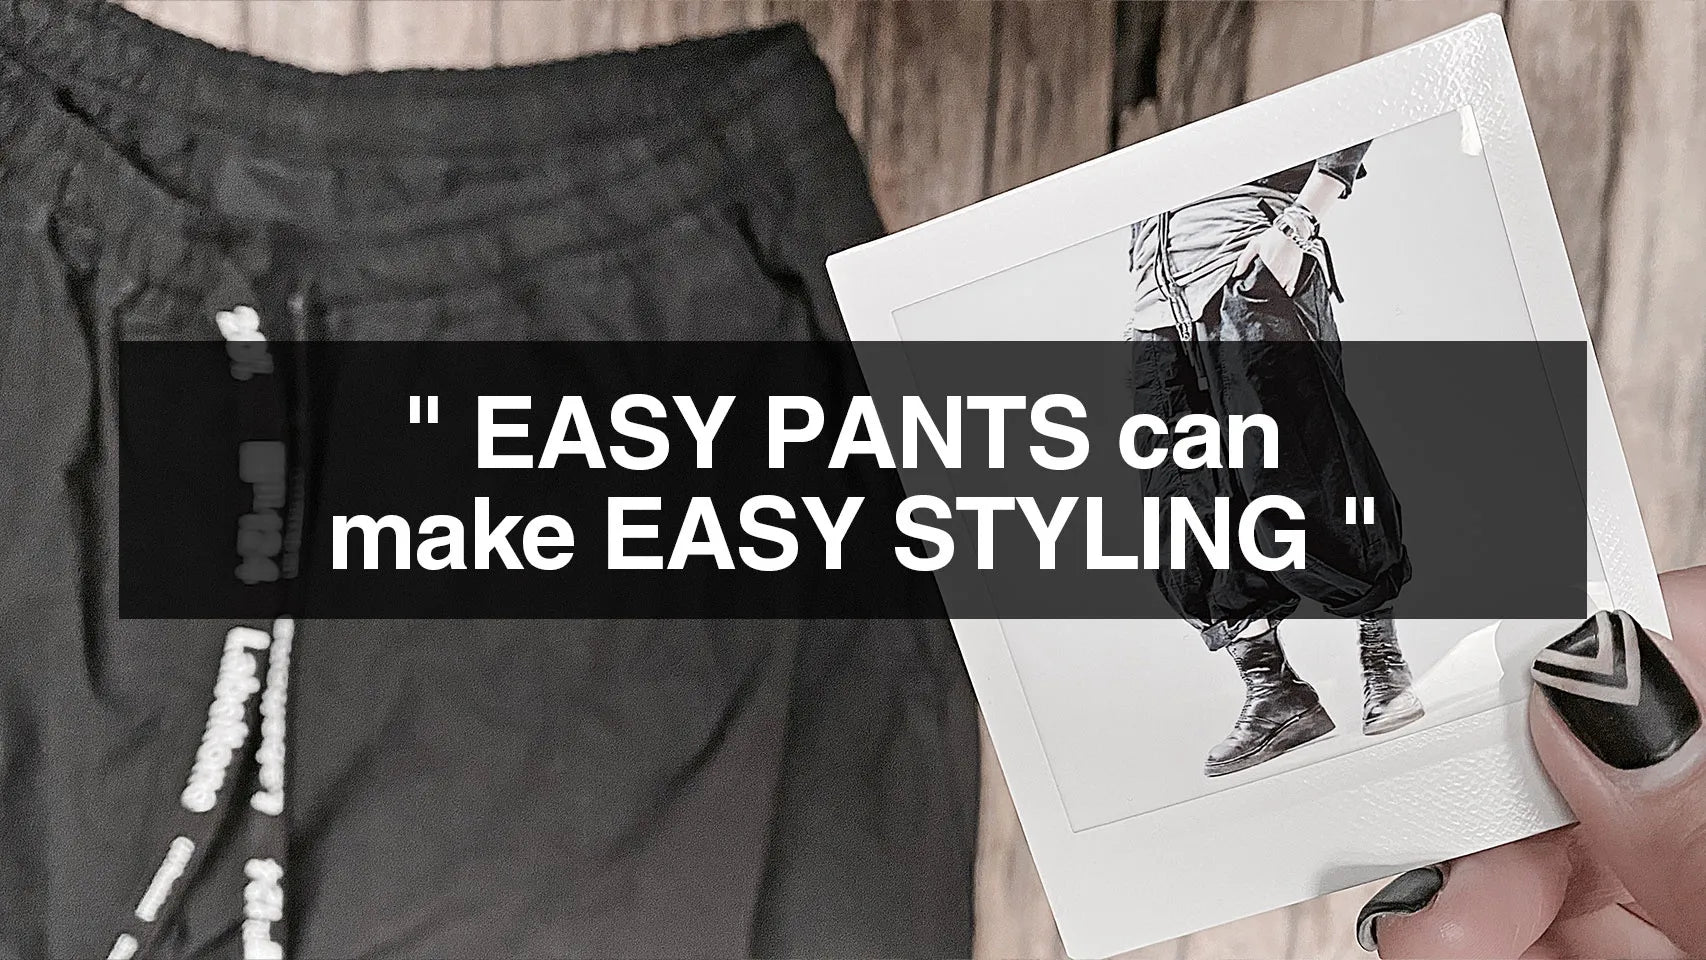 EASY PANTS can make EASY STYLING